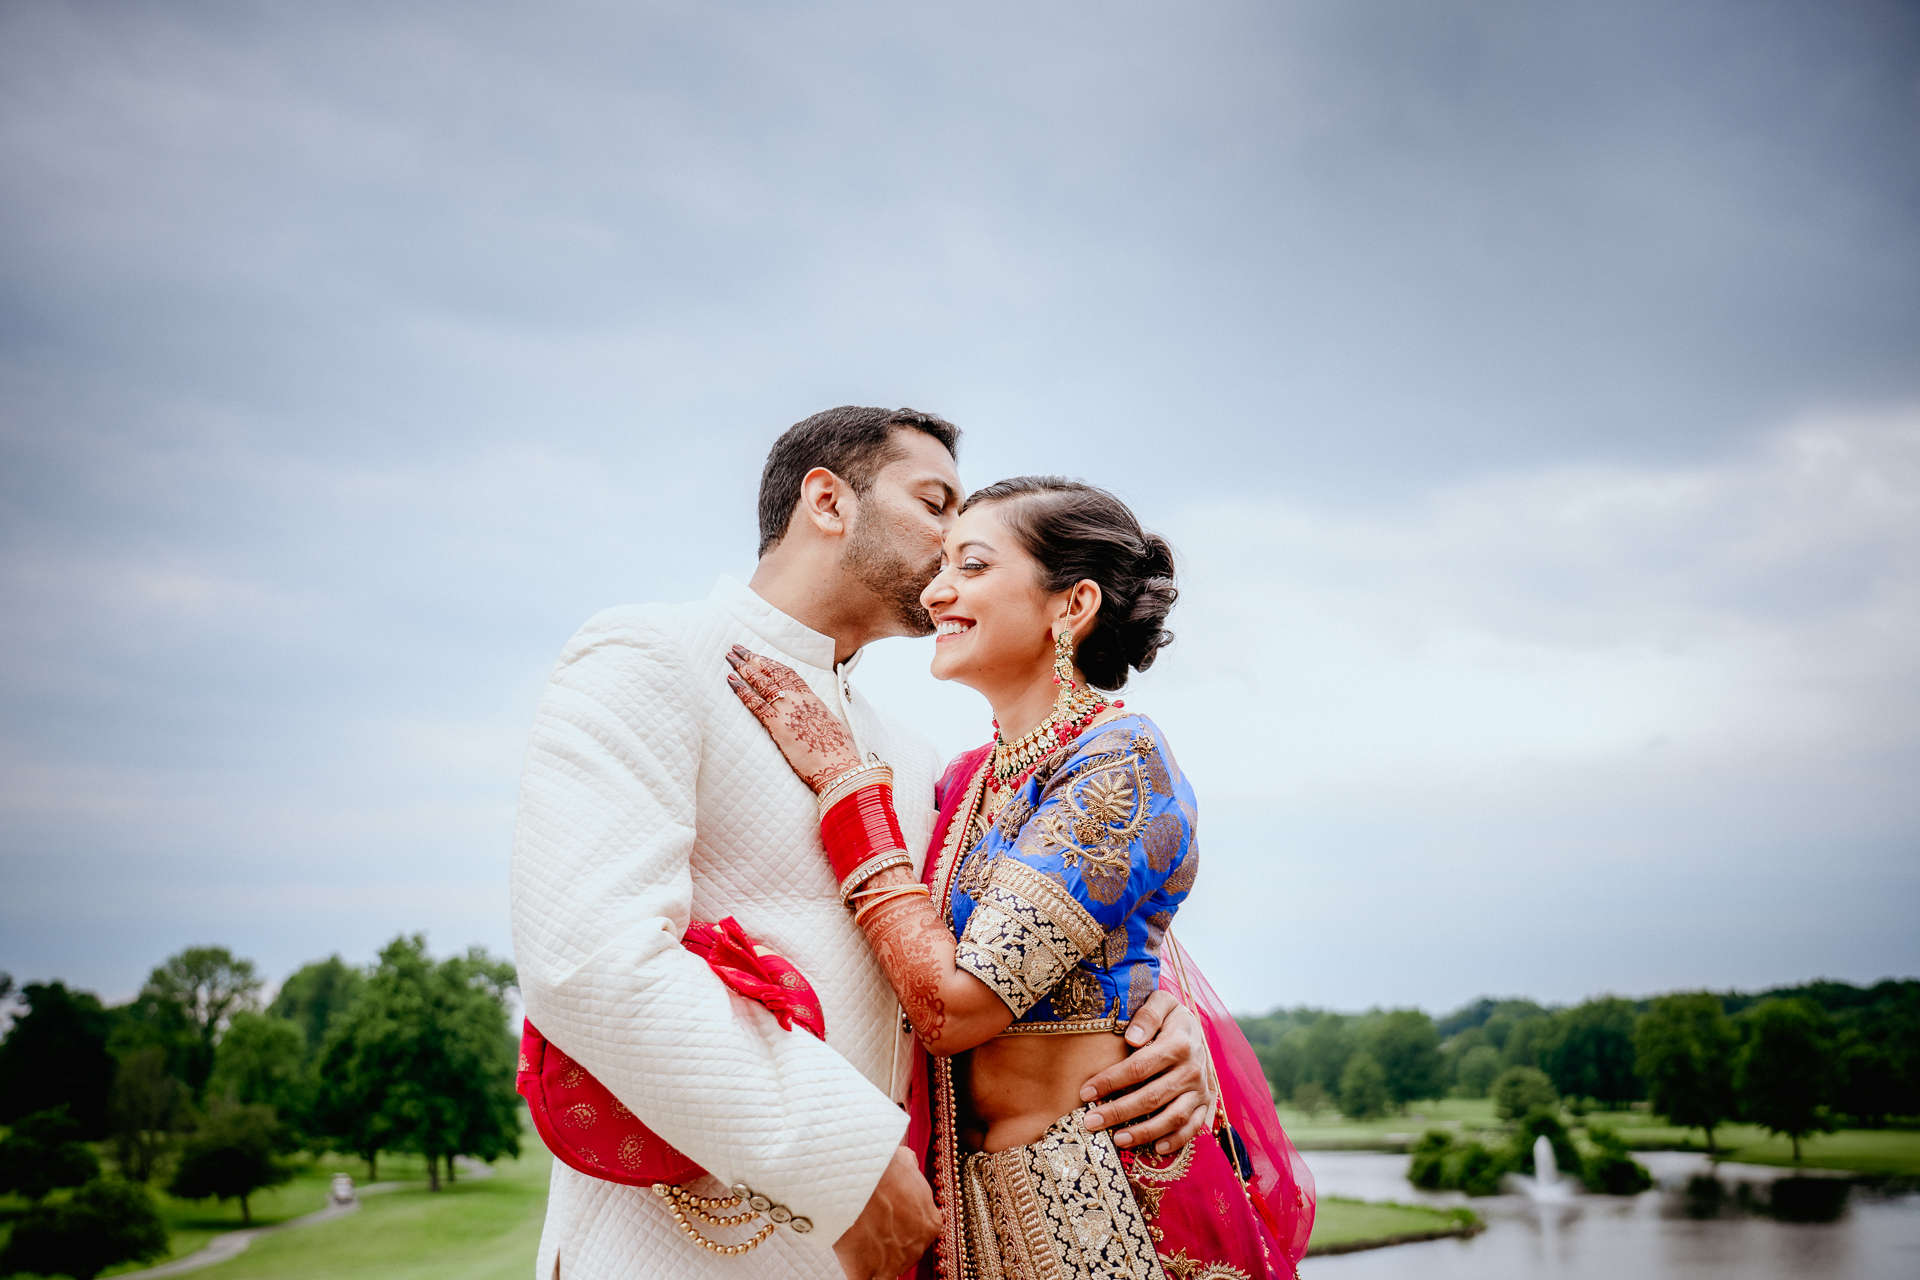 Indian Wedding Pose Photos and Images & Pictures | Shutterstock